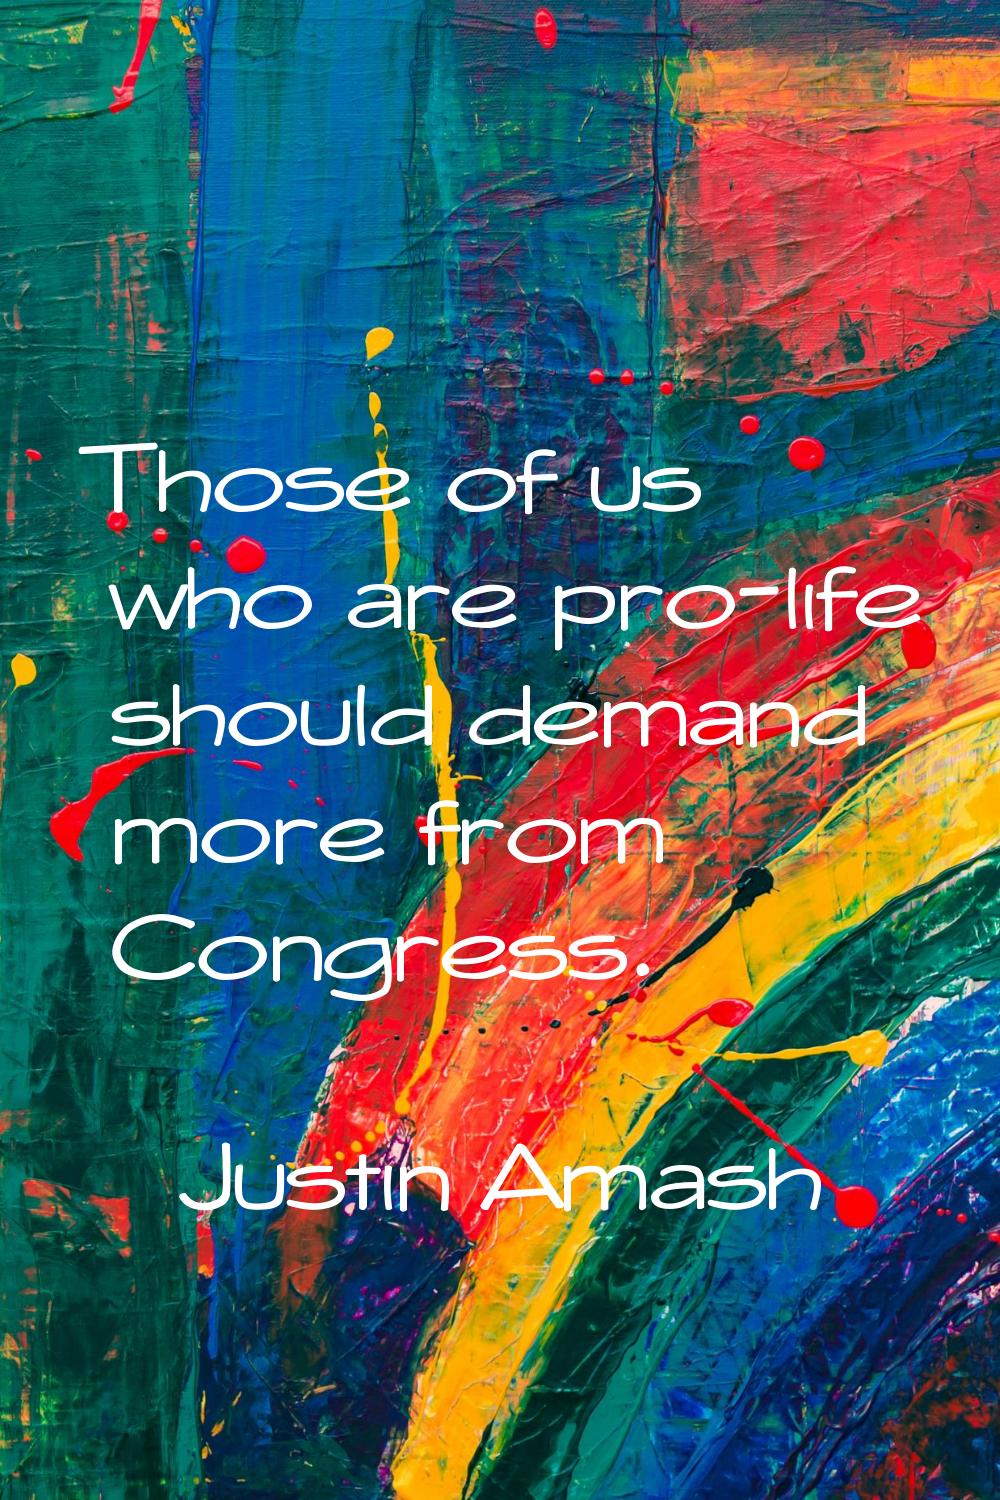 Those of us who are pro-life should demand more from Congress.